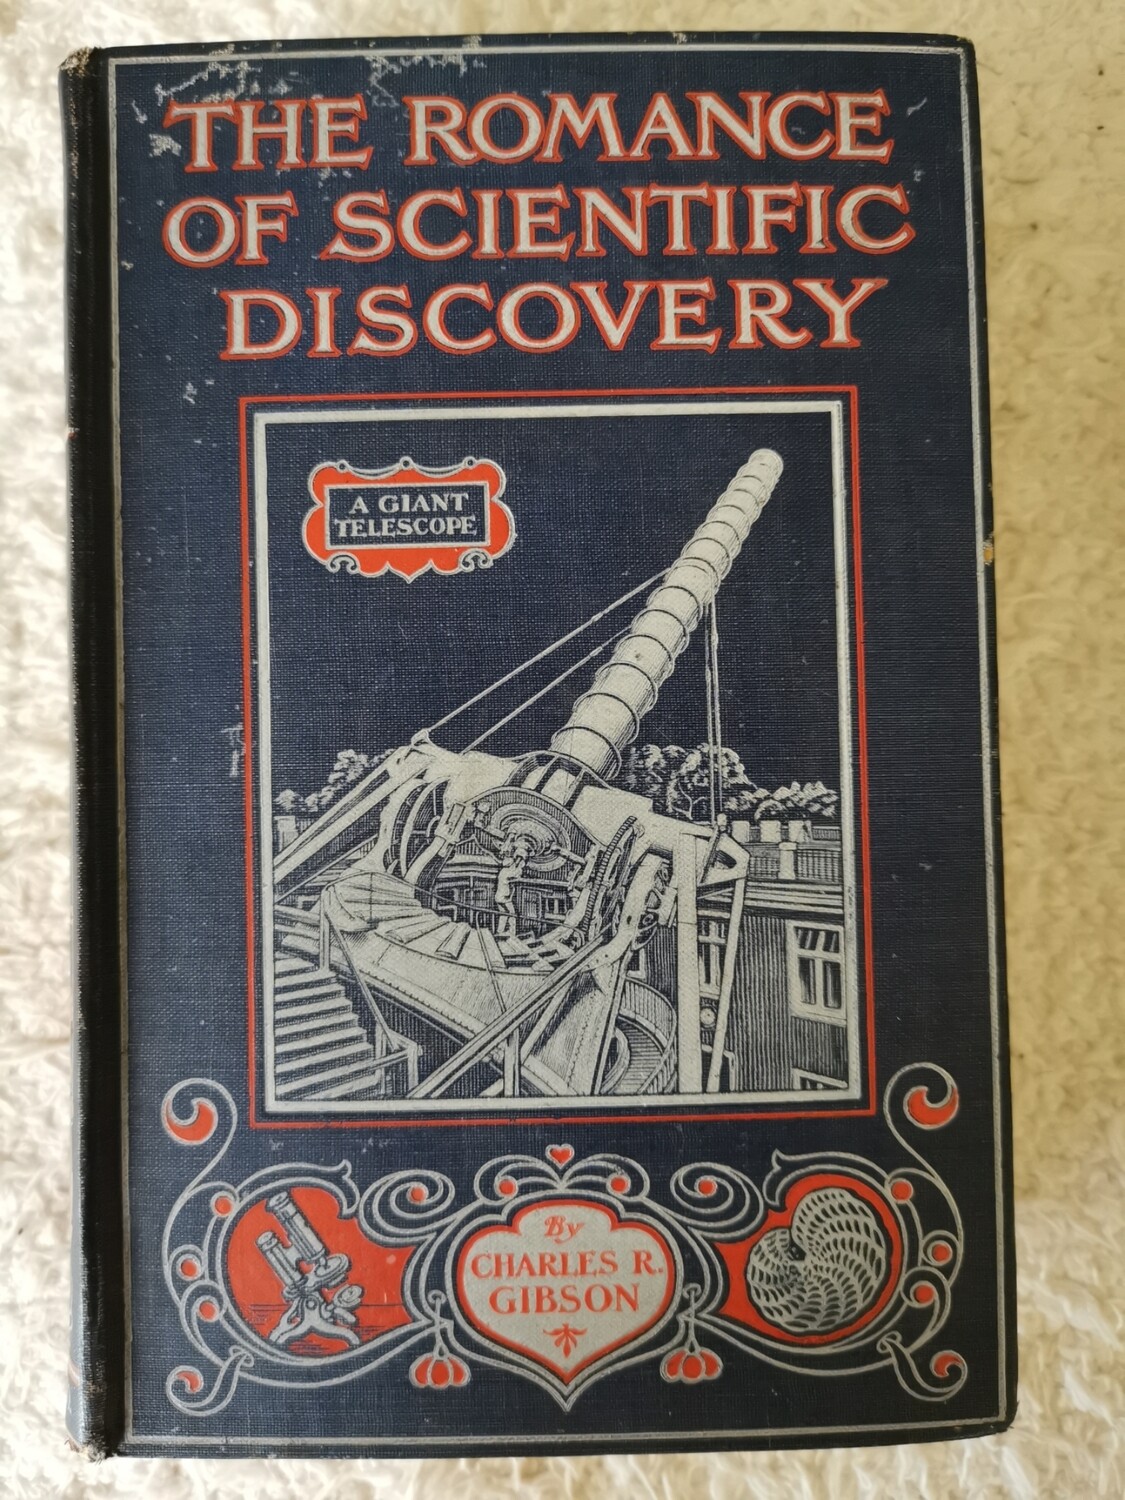 The romance od scientific discovery, Charles R. Gibson